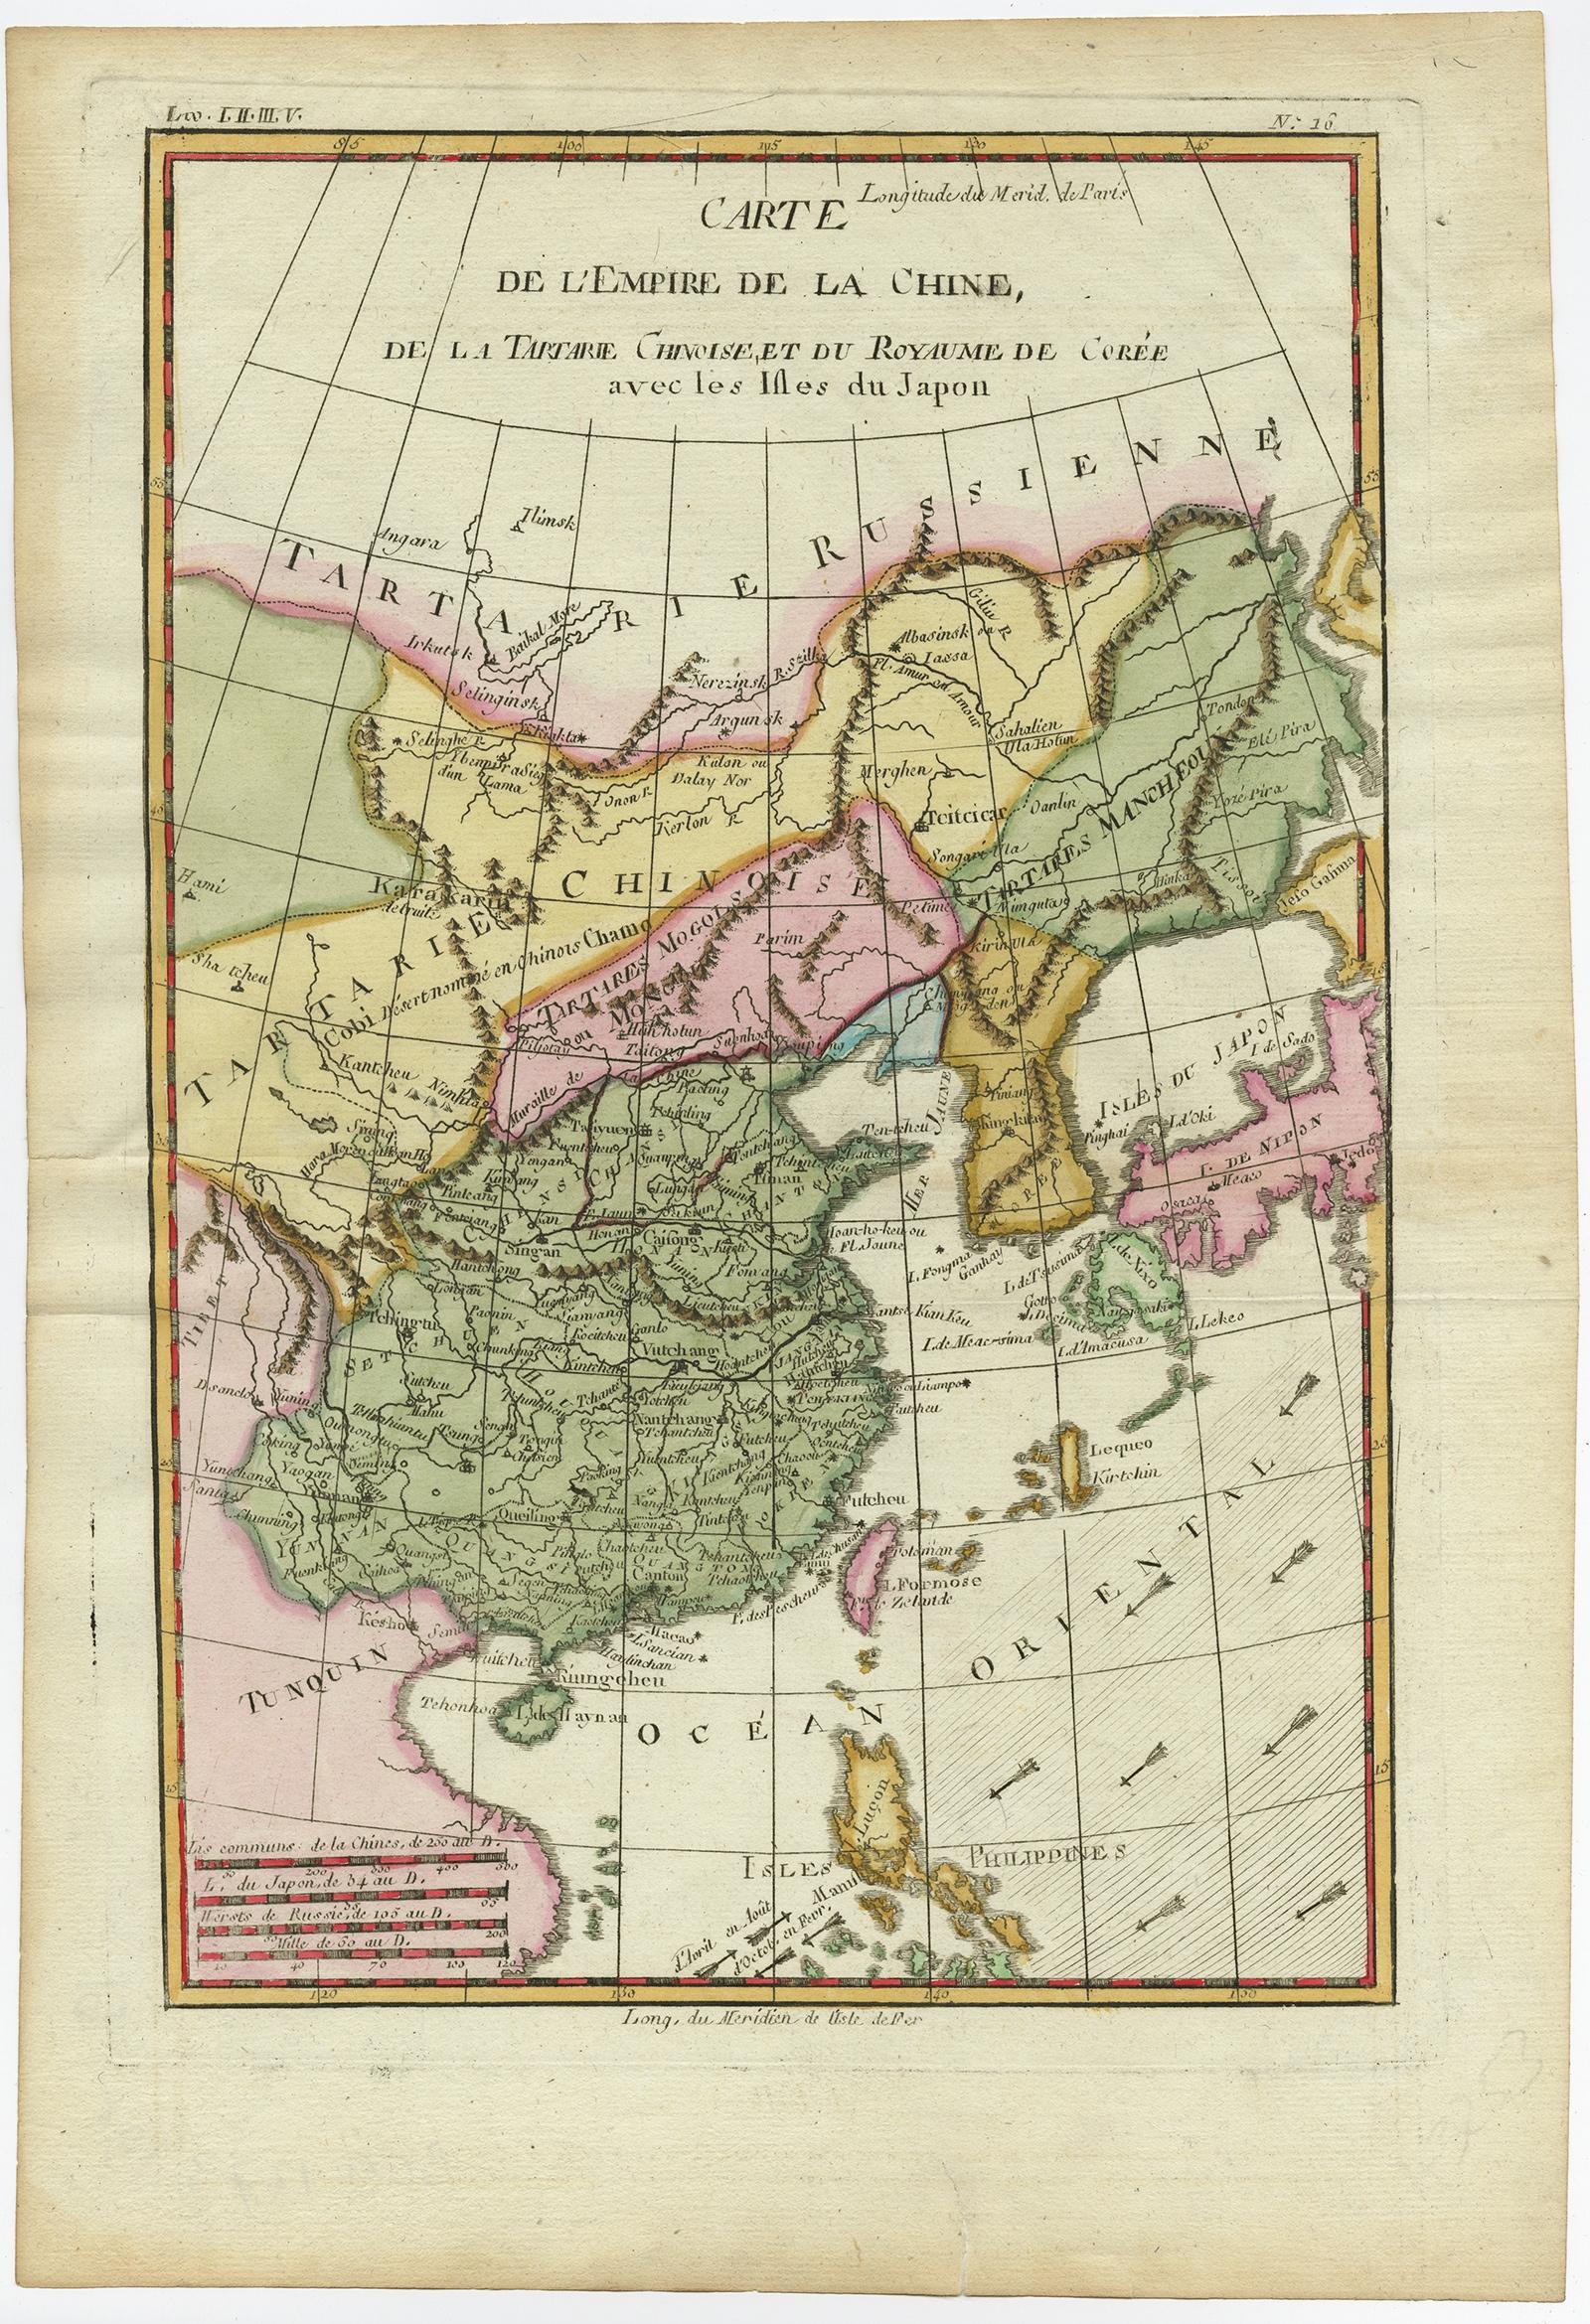 Antique map titled 'Carte de L'Empire de la Chine.' 

Decorative map of the Empire of China, depicting China, Corea ( Korea ), Japan, Tonquin and the Philippine island Lucon. Source unknown, to be determined.

Artists and Engravers: Rigobert